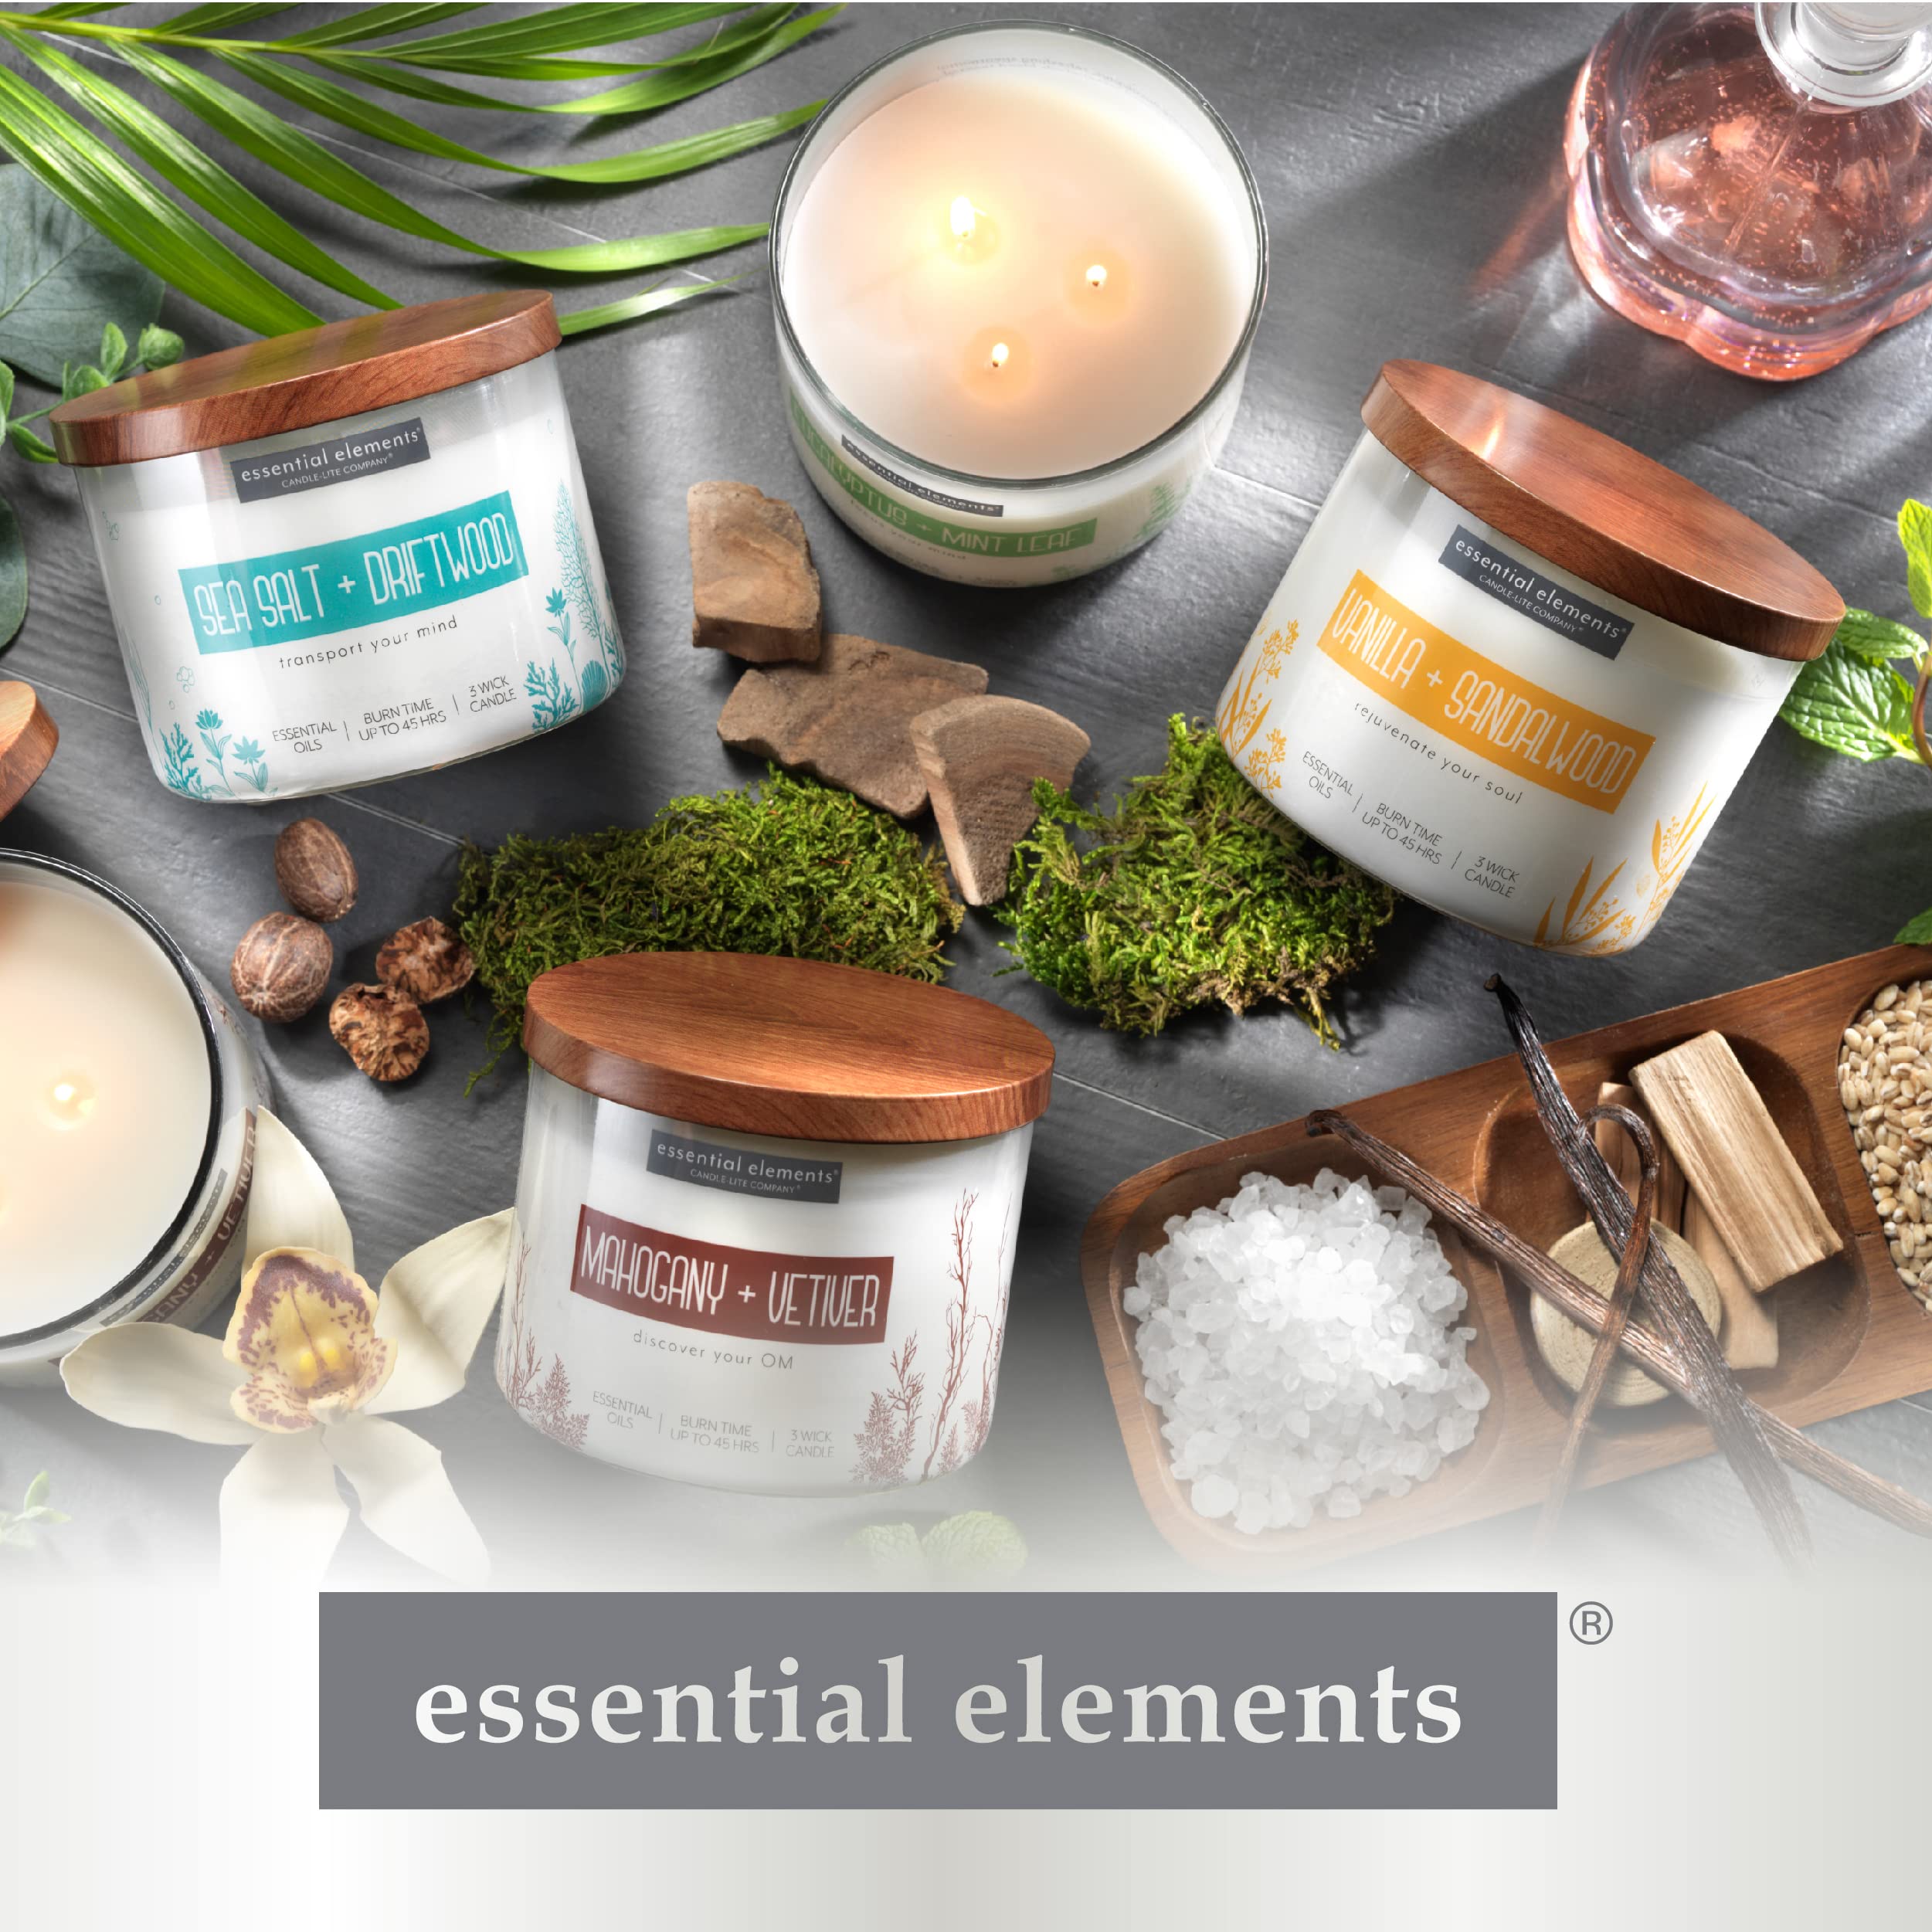 Essential Elements by Candle-lite Scented Candles, Vanilla & Sandalwood Fragrance, One 14.75 oz. Three-Wick Aromatherapy Candle with 45 Hours of Burn Time, Off-White Color